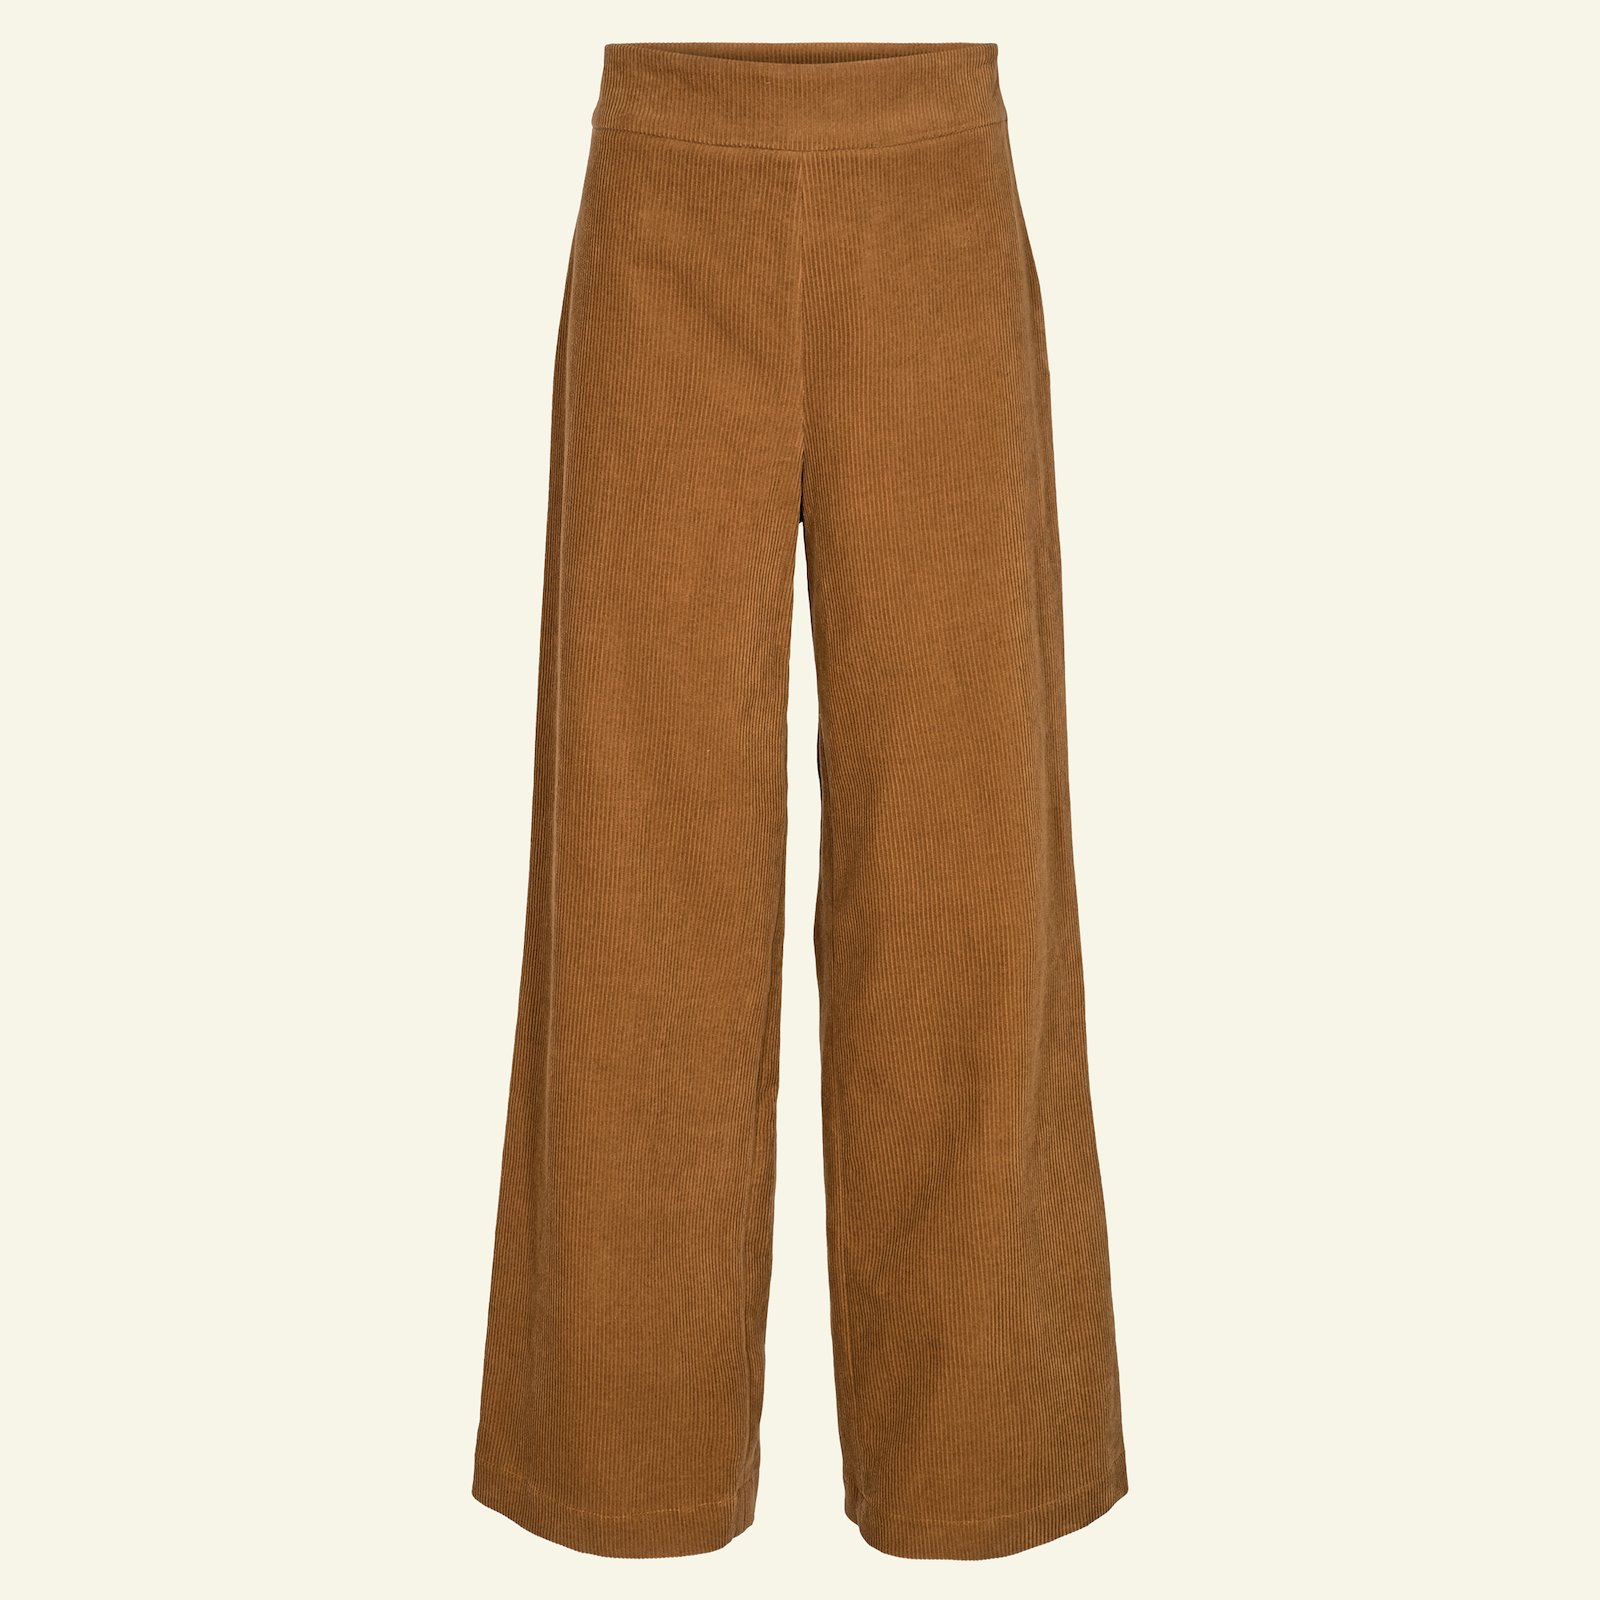 Highwaist and wide legs trousers, 32/4 p20052_430810_sskit